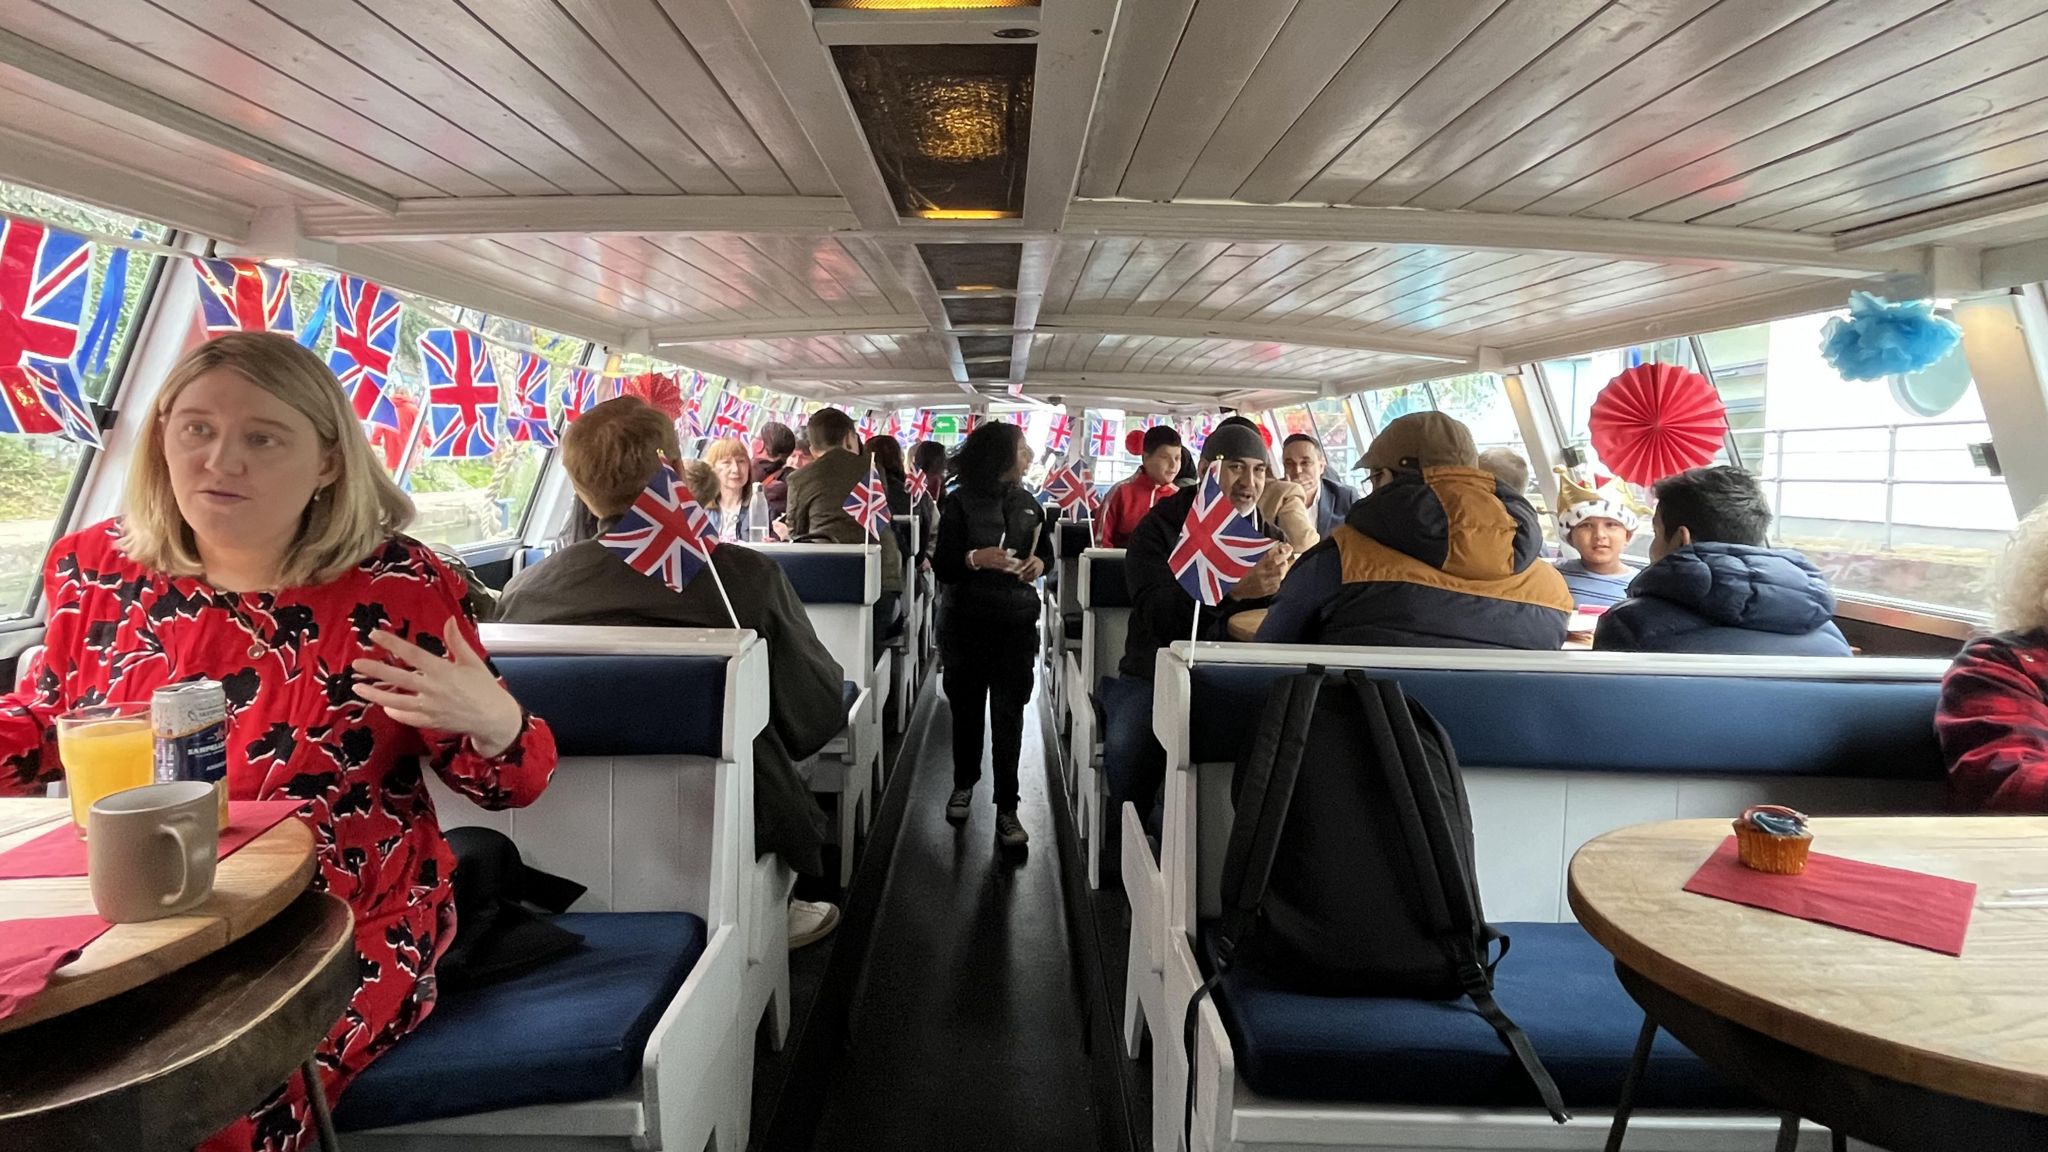 Inside the barge as it set off